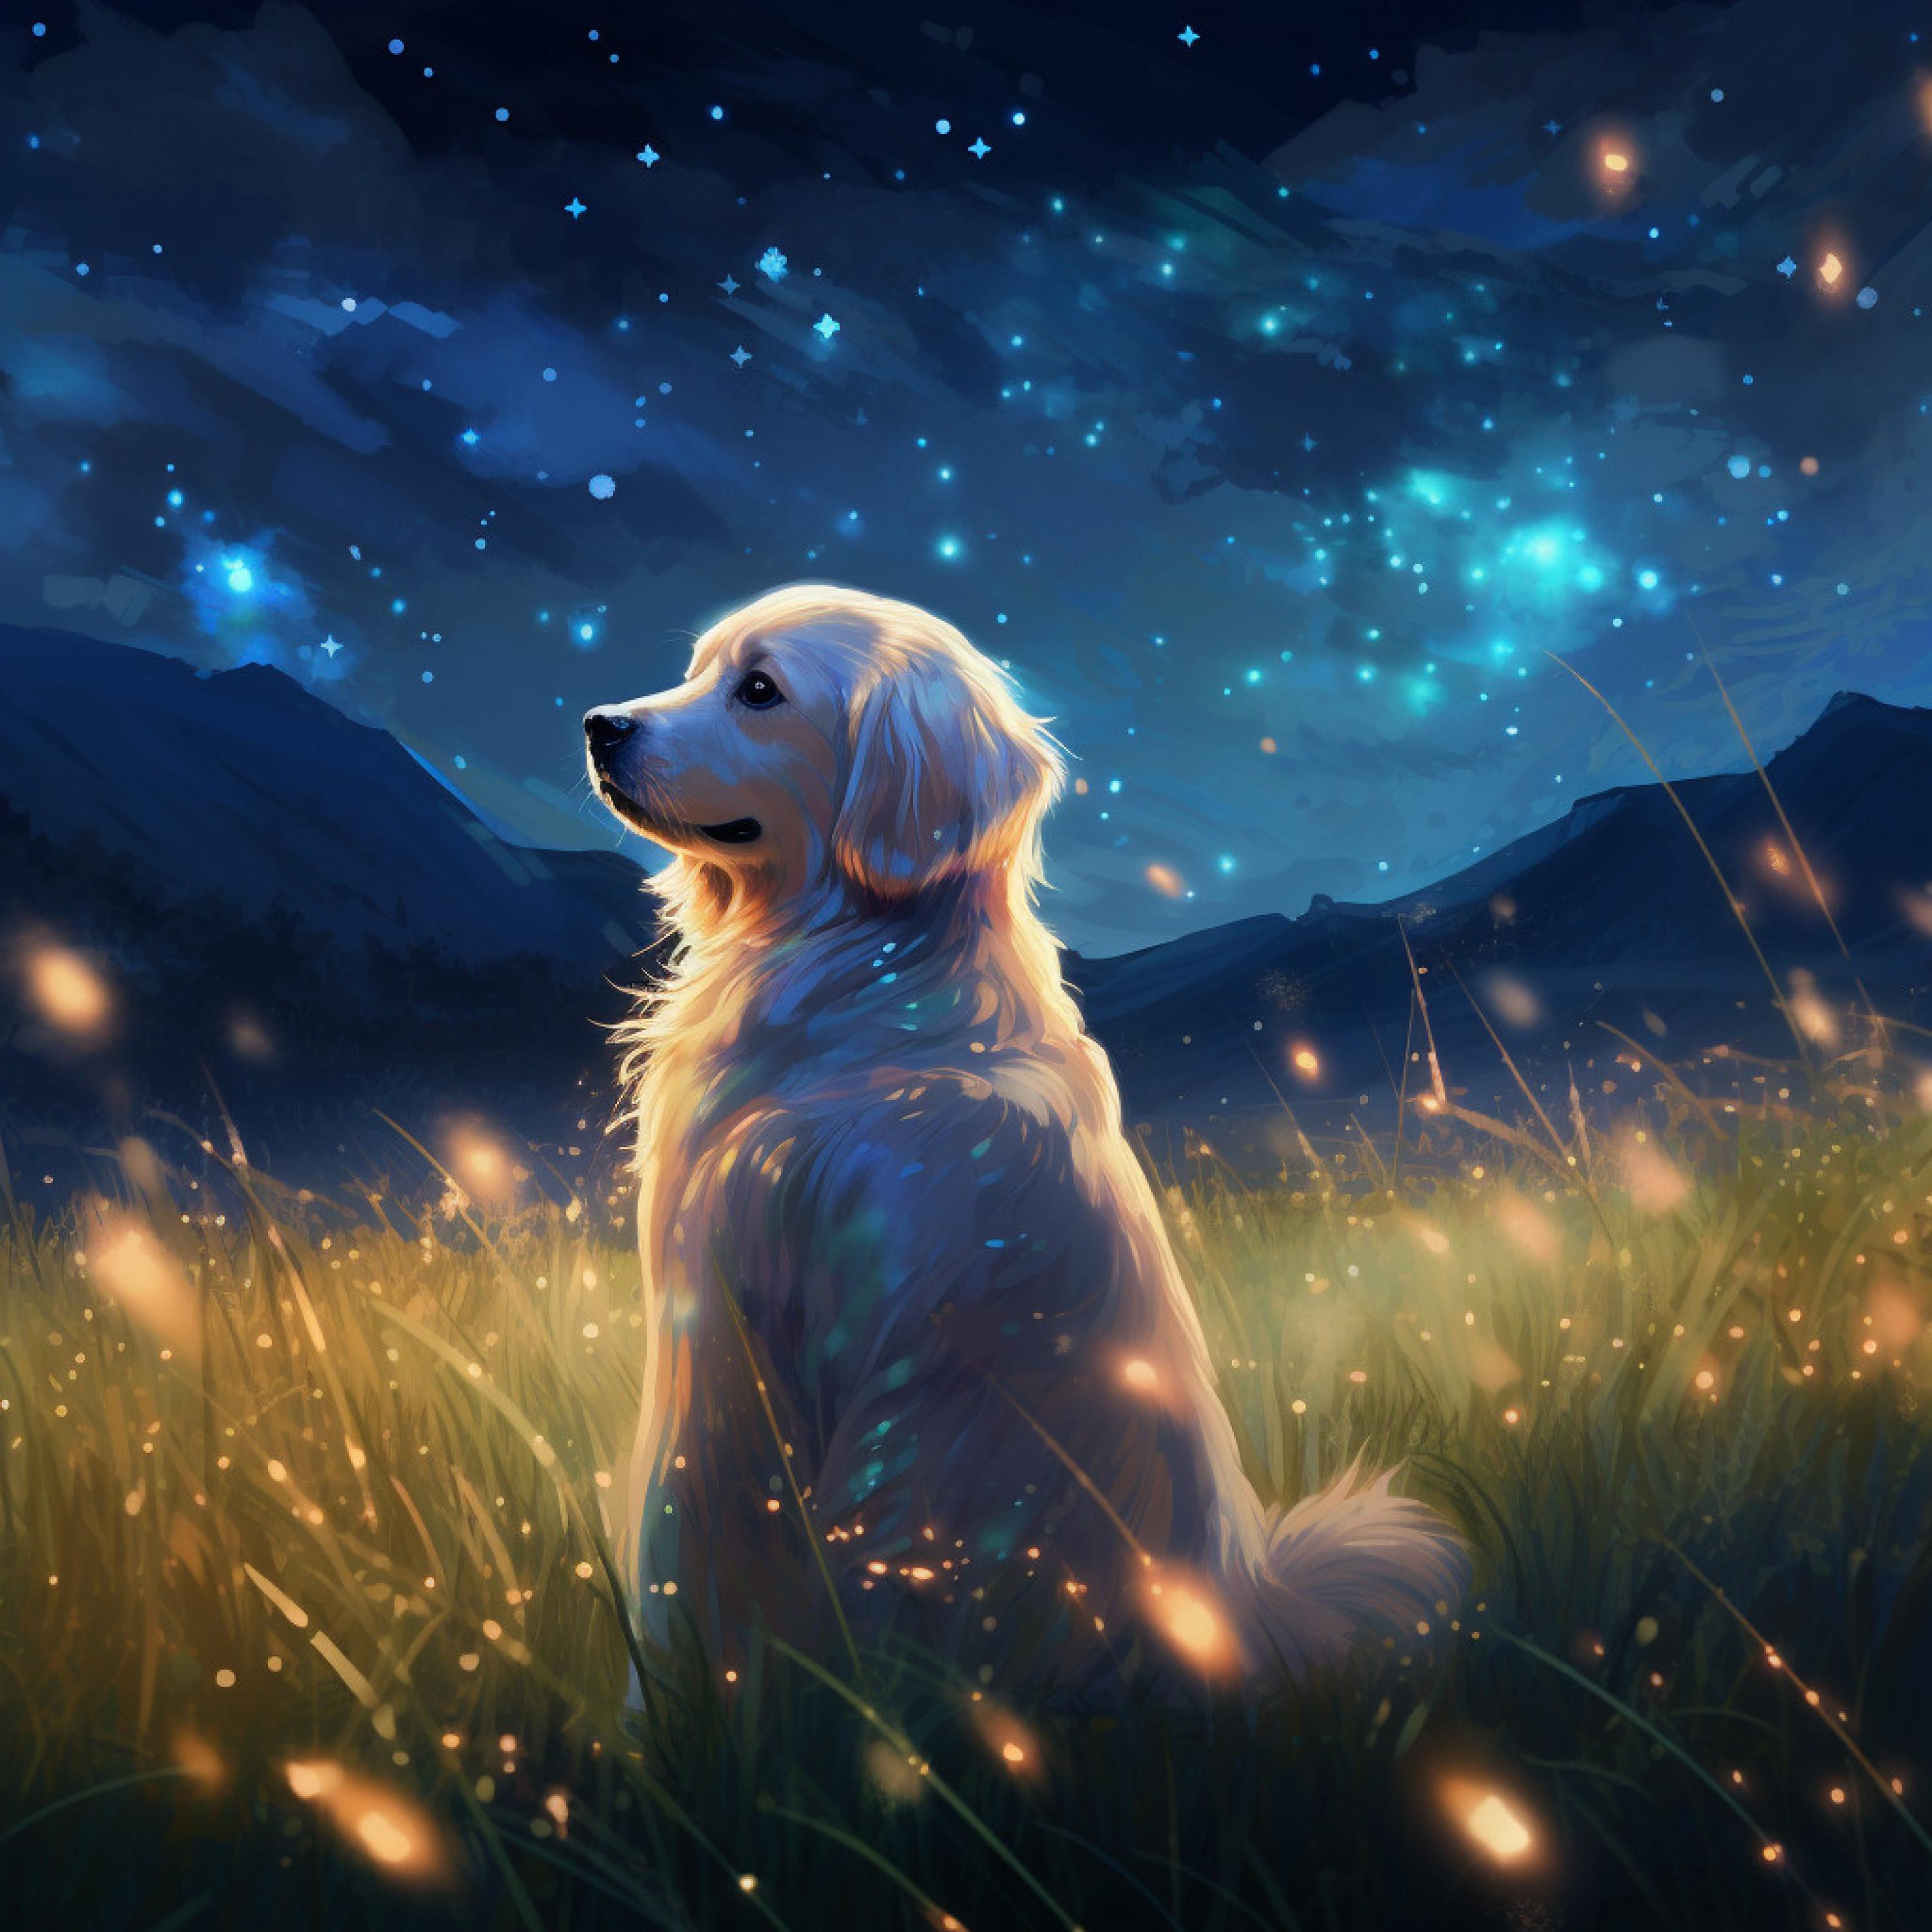 Energy Orbiting Healing - Raindrops and Woofs Melody